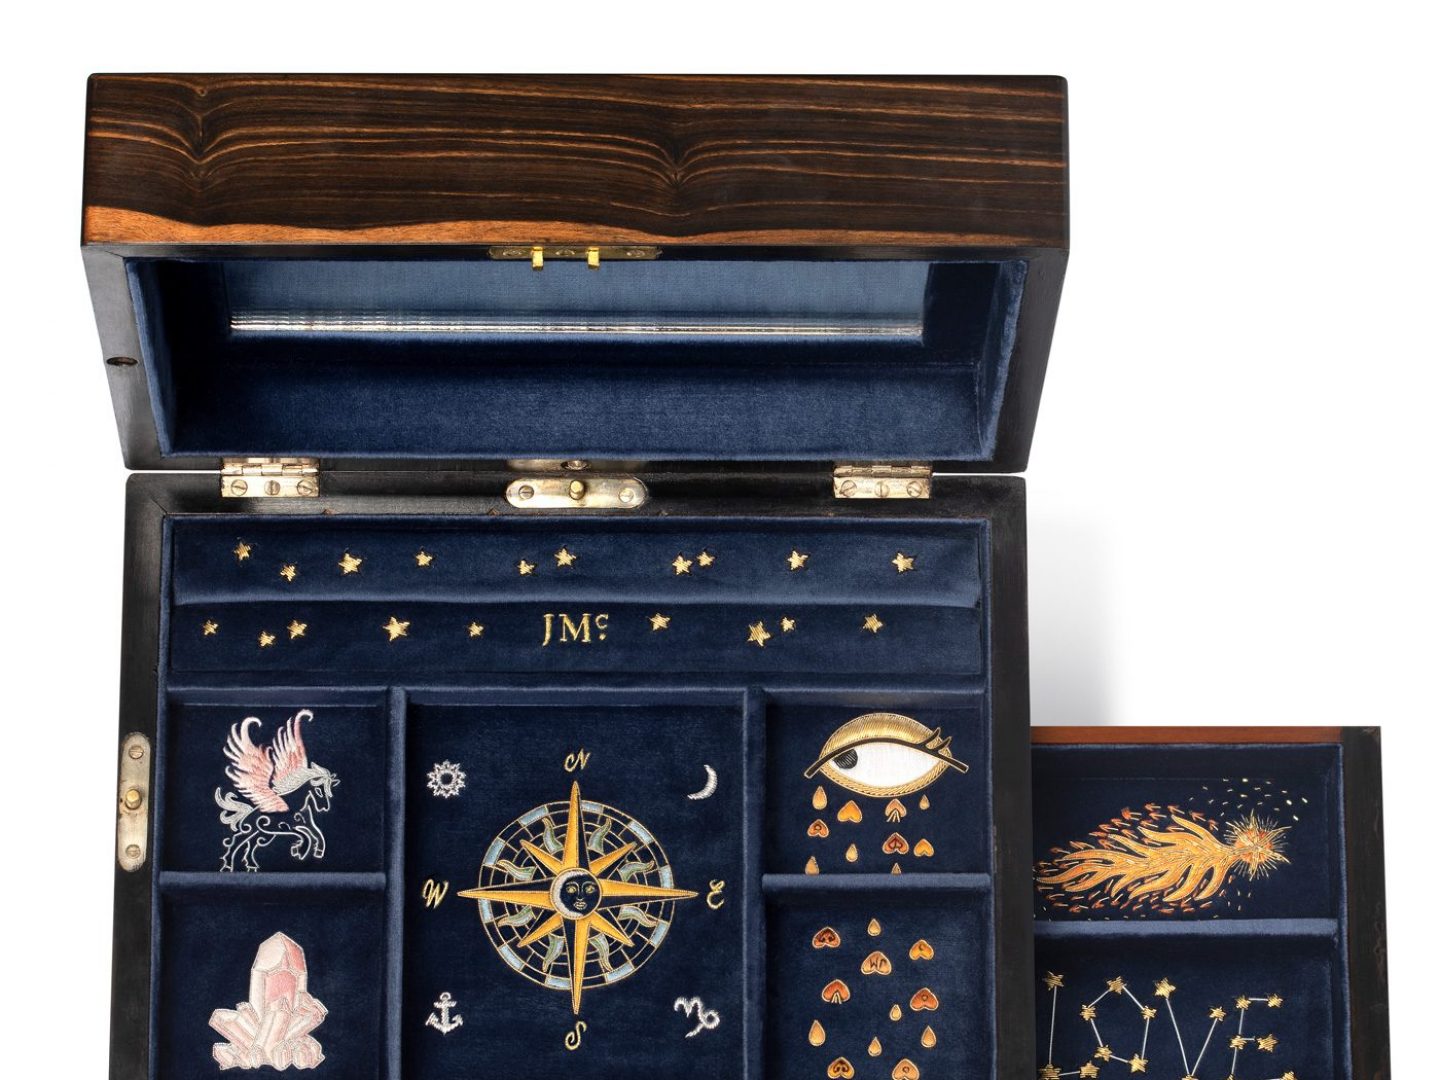 Heirloom Jewellery boxes by Jessica McCormack